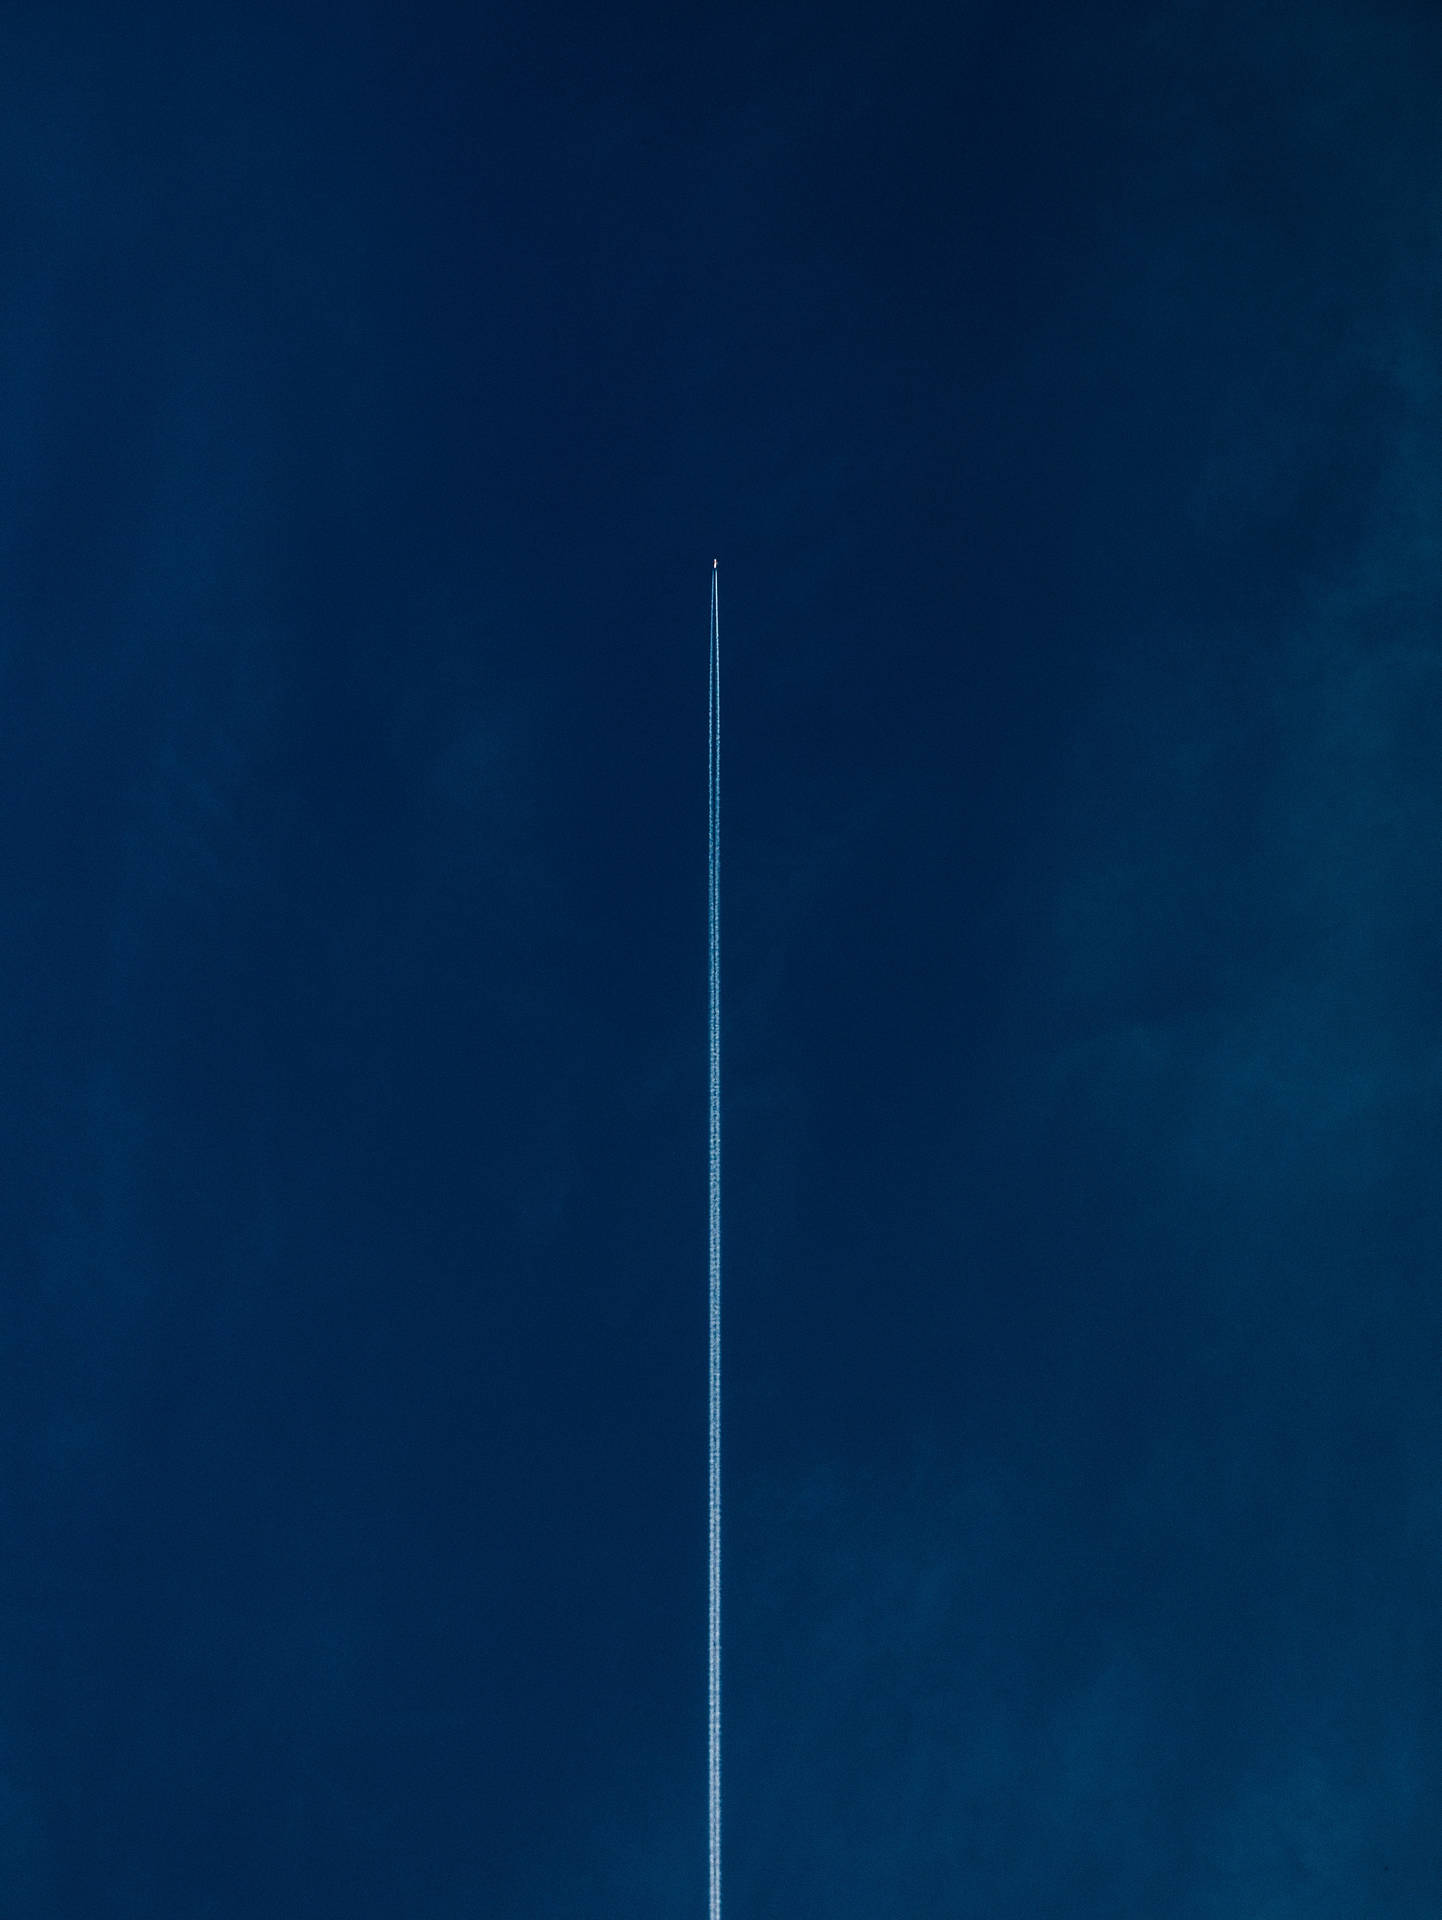 Airplane 3123X4159 Wallpaper and Background Image